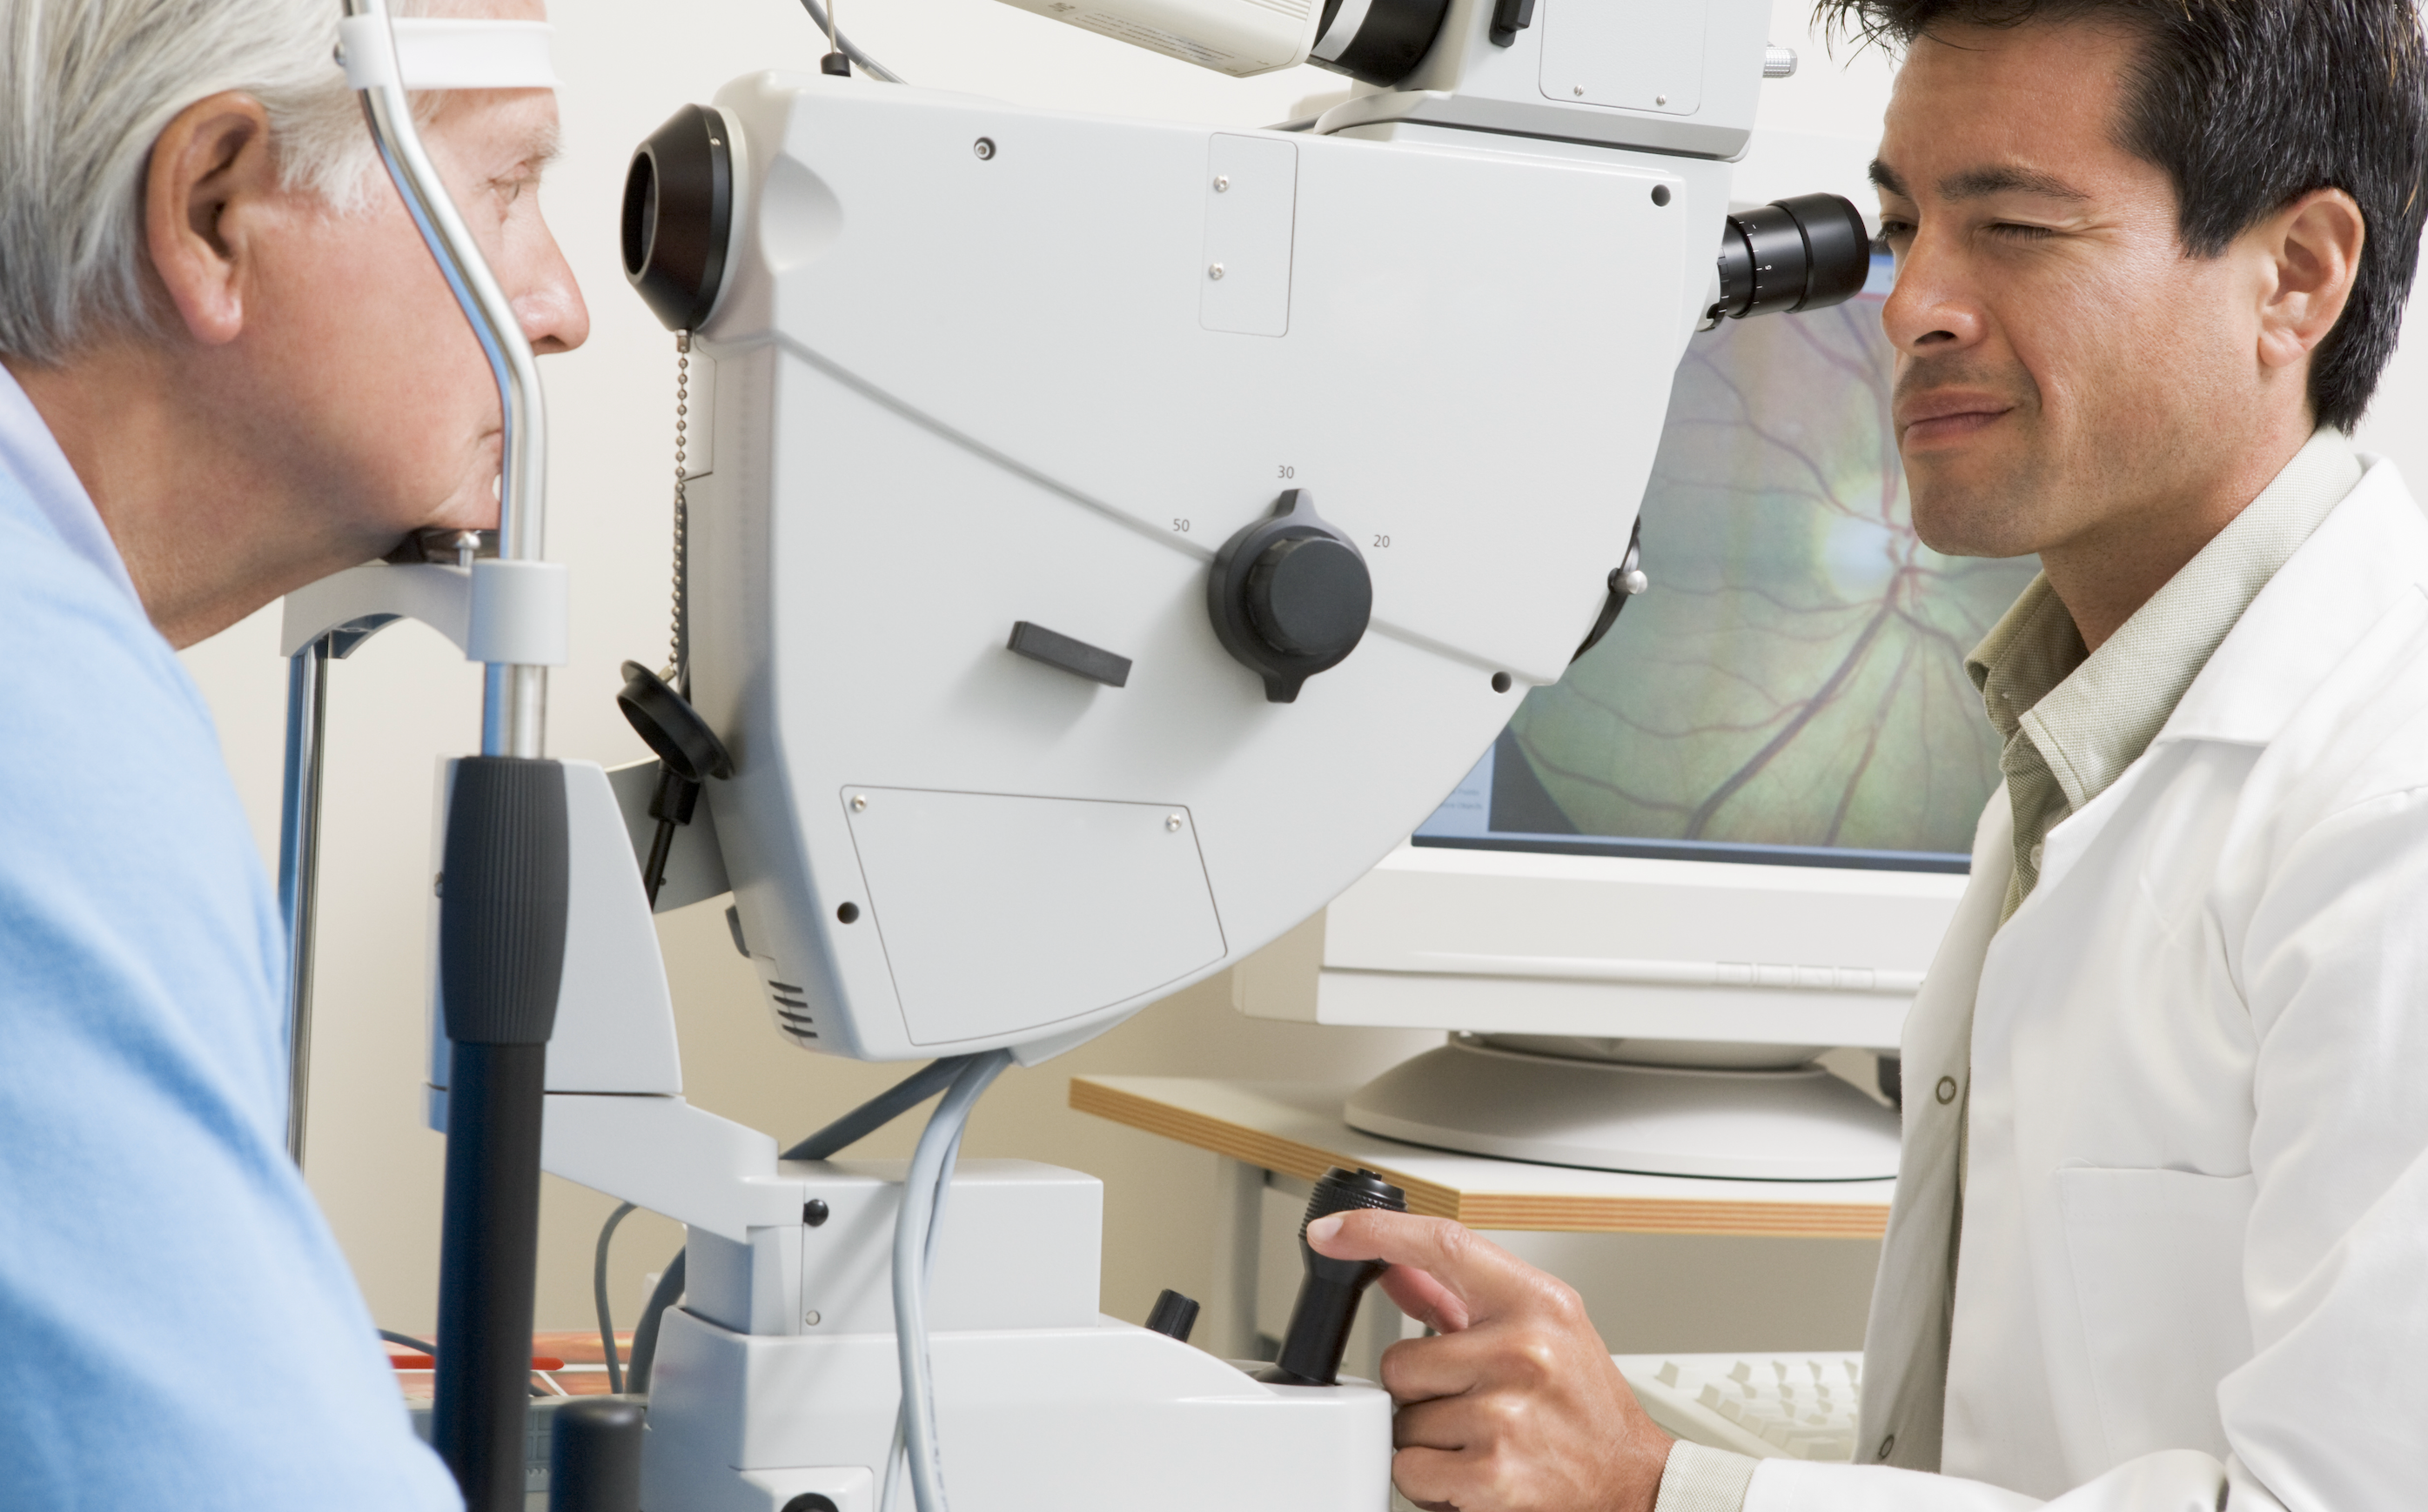 Latanoprost ophthalmic solution is the first and only preservative-free latanoprost for patients with primary open-angle glaucoma and ocular hypertension in the United States. (Image courtesy of Adobe Stock) 